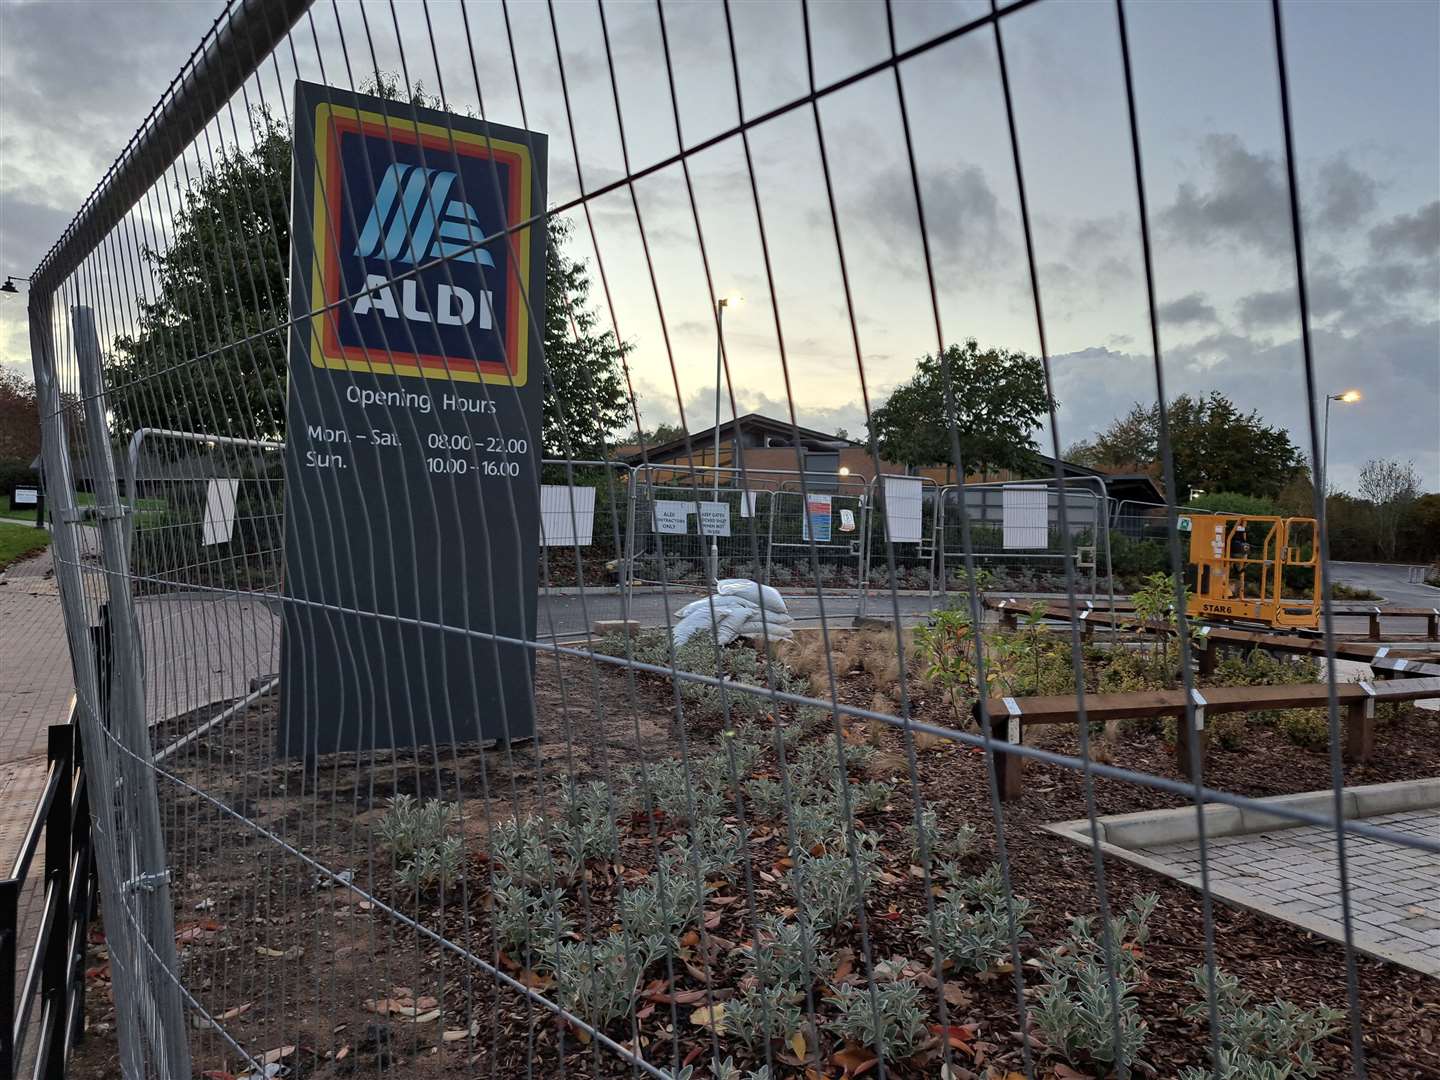 The new Aldi in Kings Hill is due to open in November